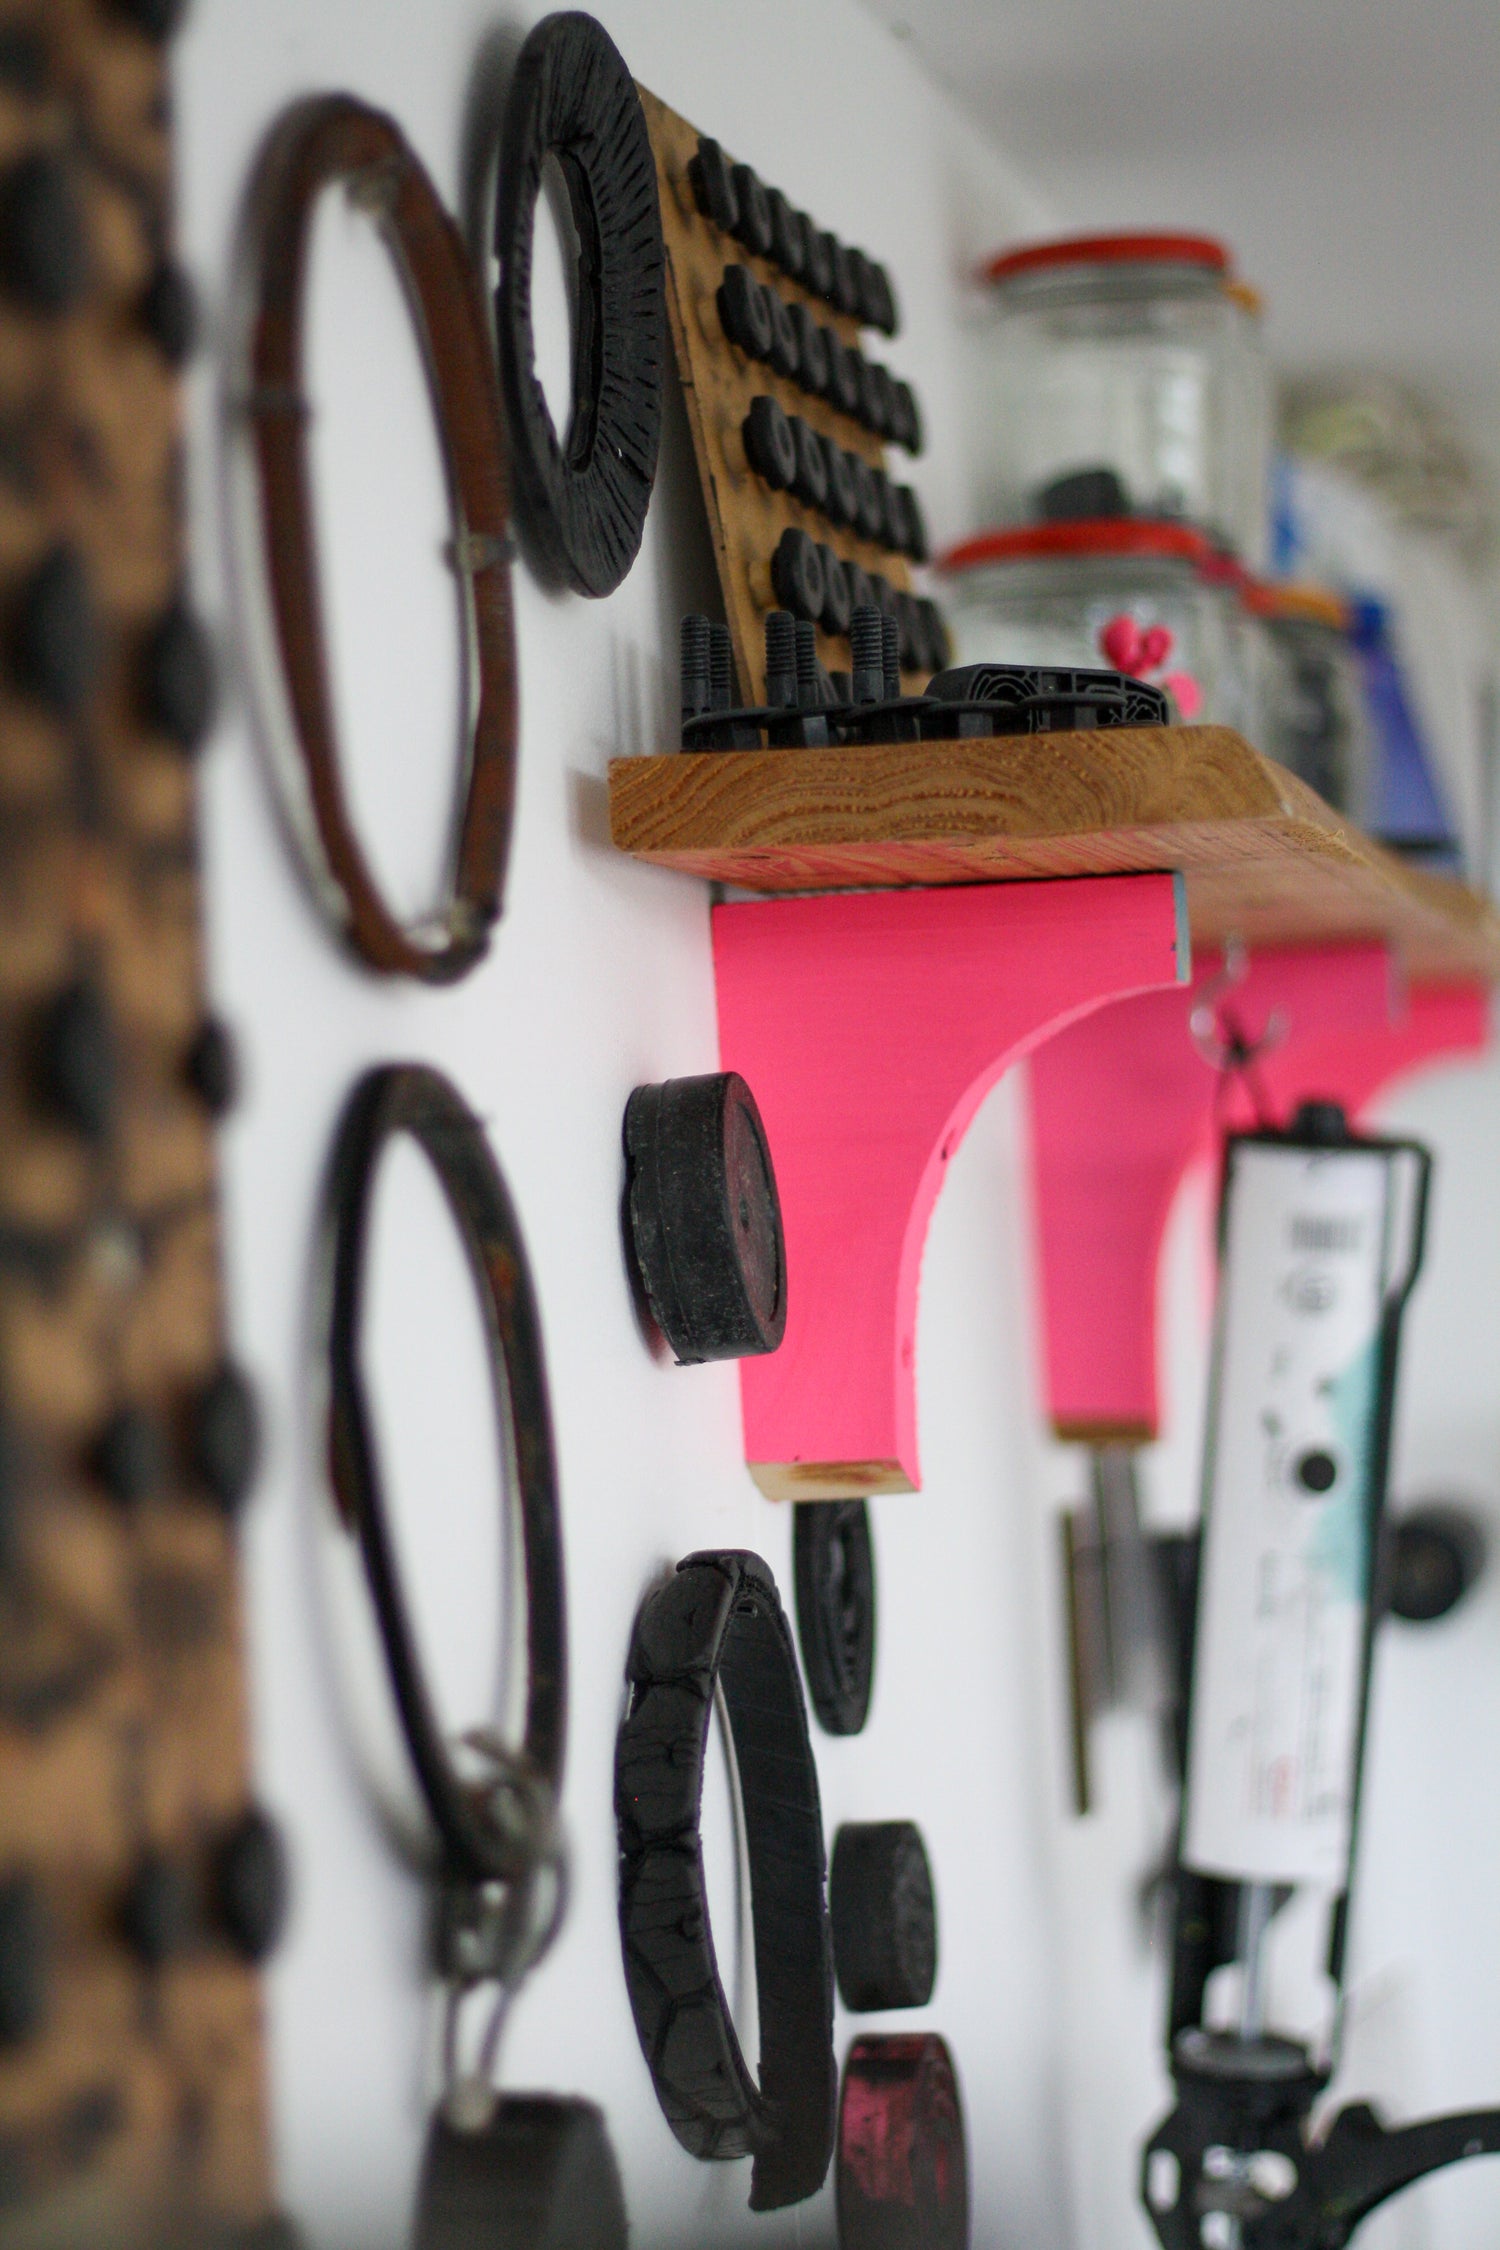 The interior of a sustainable print studio. On the ways hang various circular items found on the beach. A hand built shelf is in the back ground, with vivid pink brackets.. Jars of blanking plugs sit on the shelf.